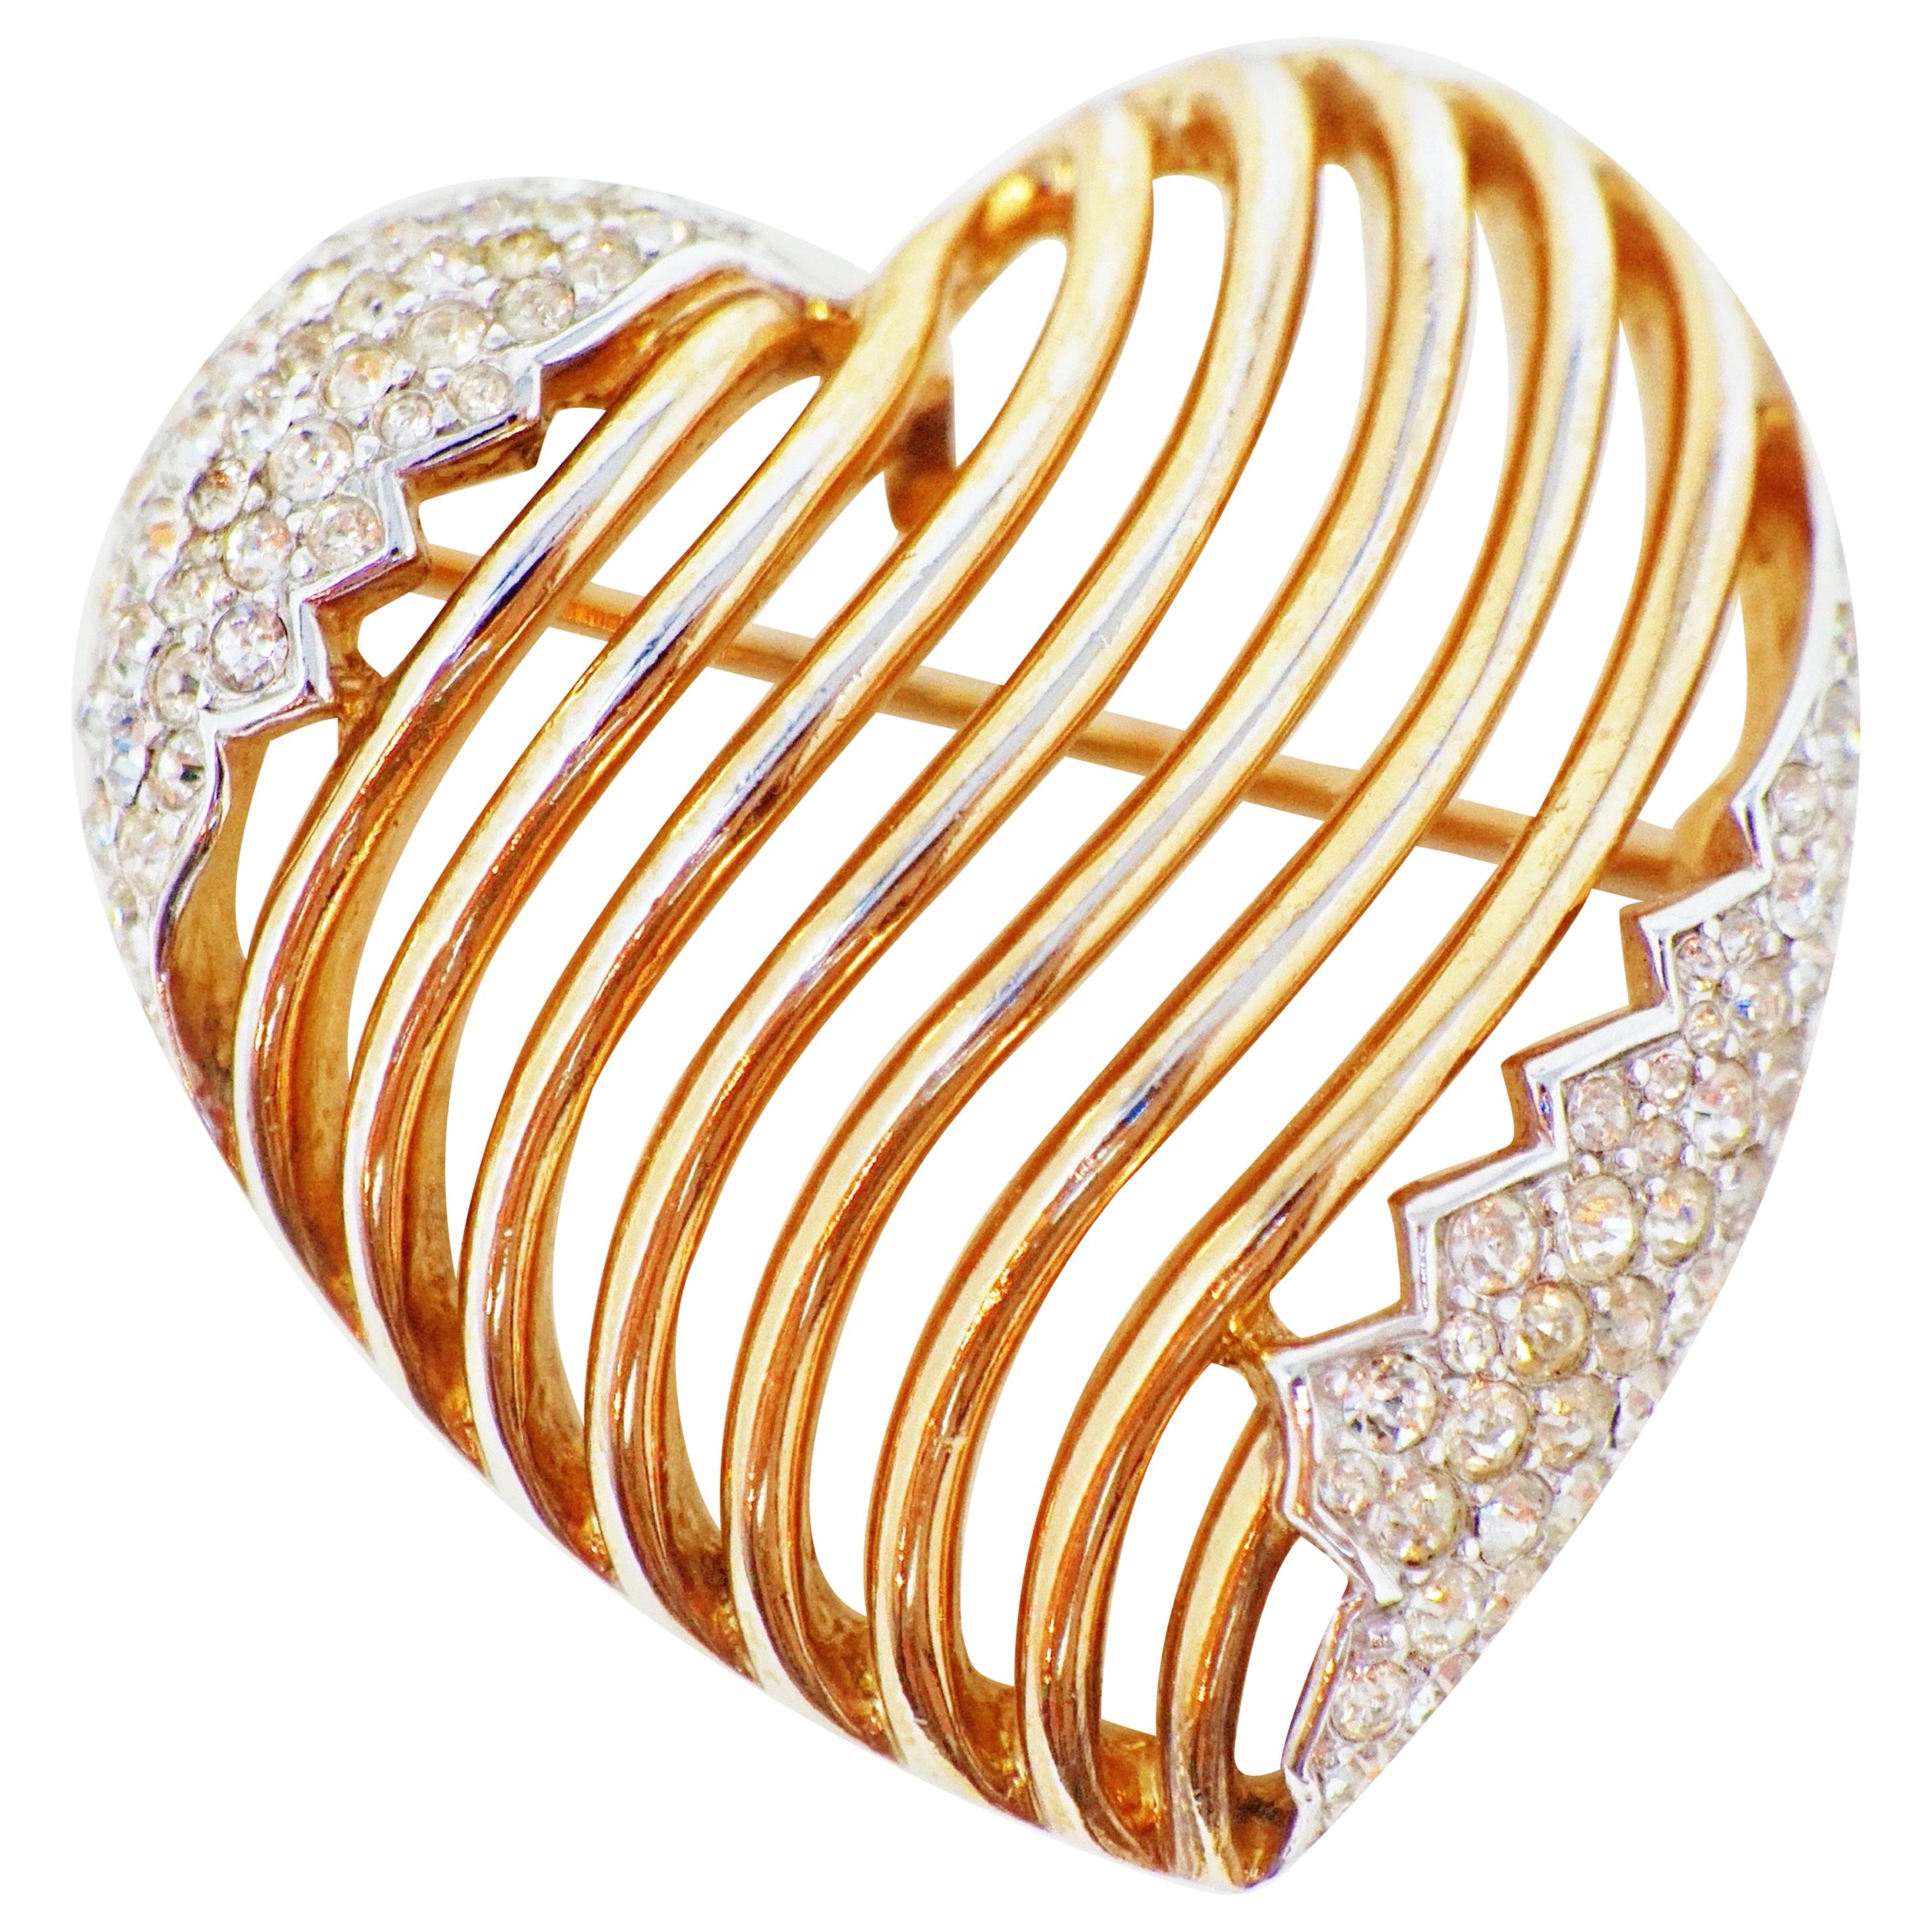 Crown Trifari Gilded Heart Brooch with Swarovski Pavé by Alfred Philippe, 1953